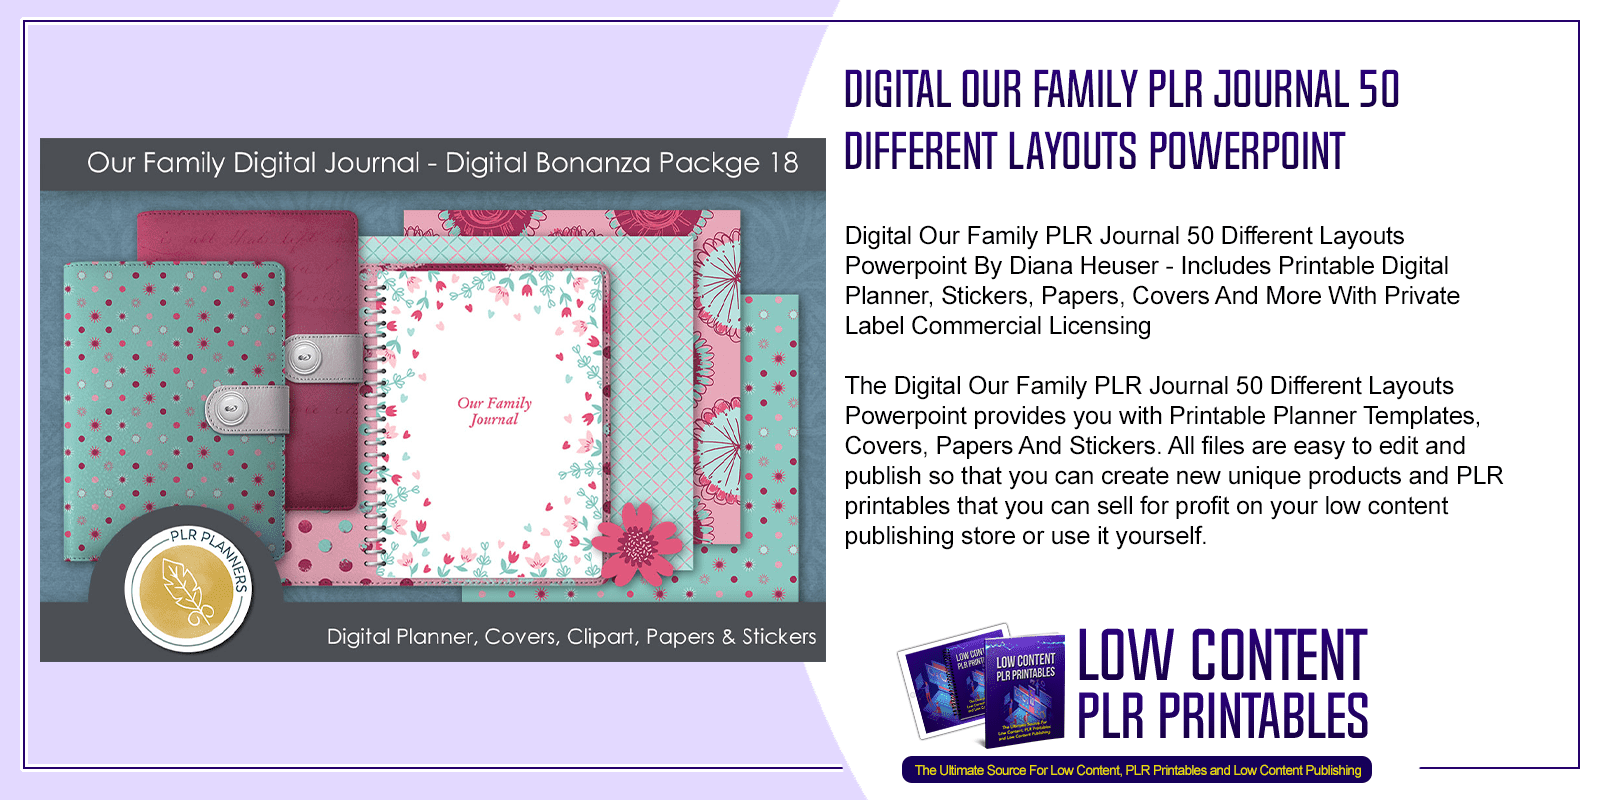 Digital Our Family PLR Journal 50 Different Layouts Powerpoint